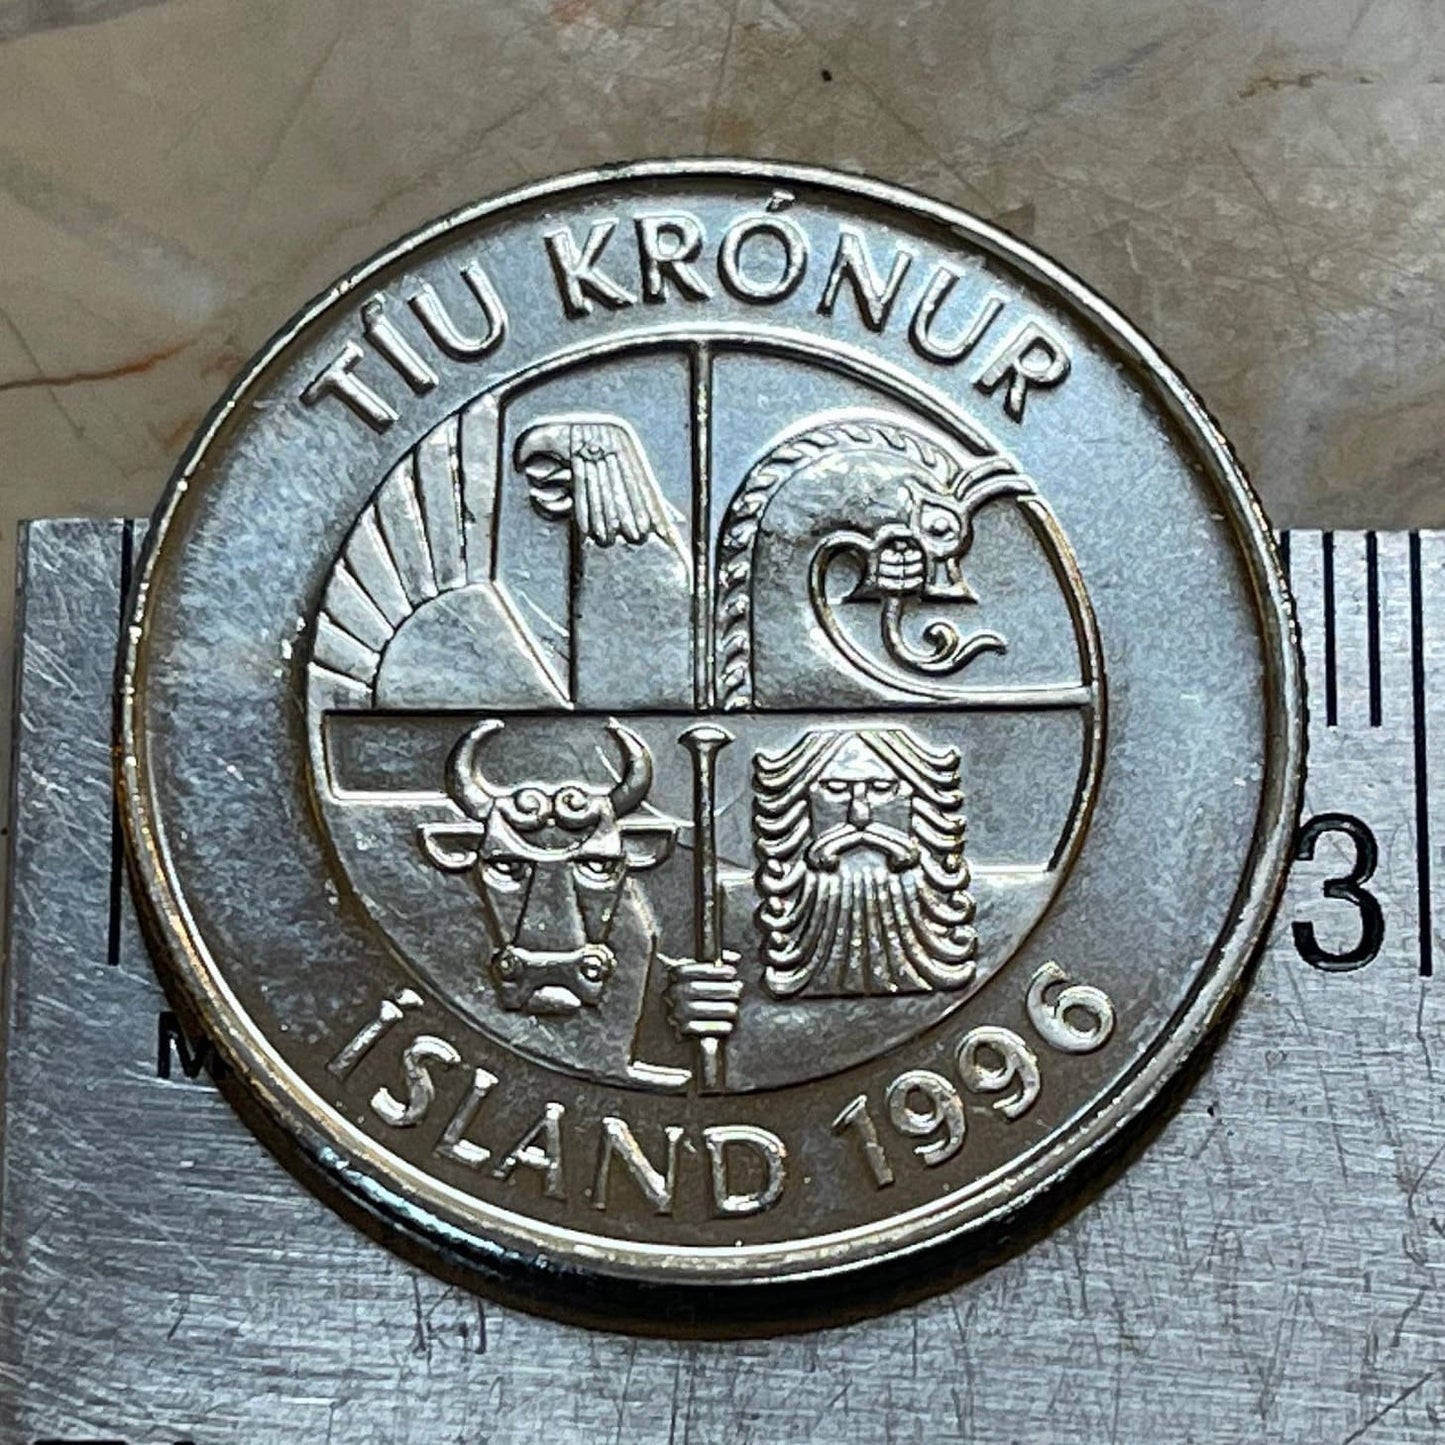 Capelin Fish & Landvaettir 10 Kronur Iceland Authentic Coin Money for Jewelry and Craft Making (Smelt)